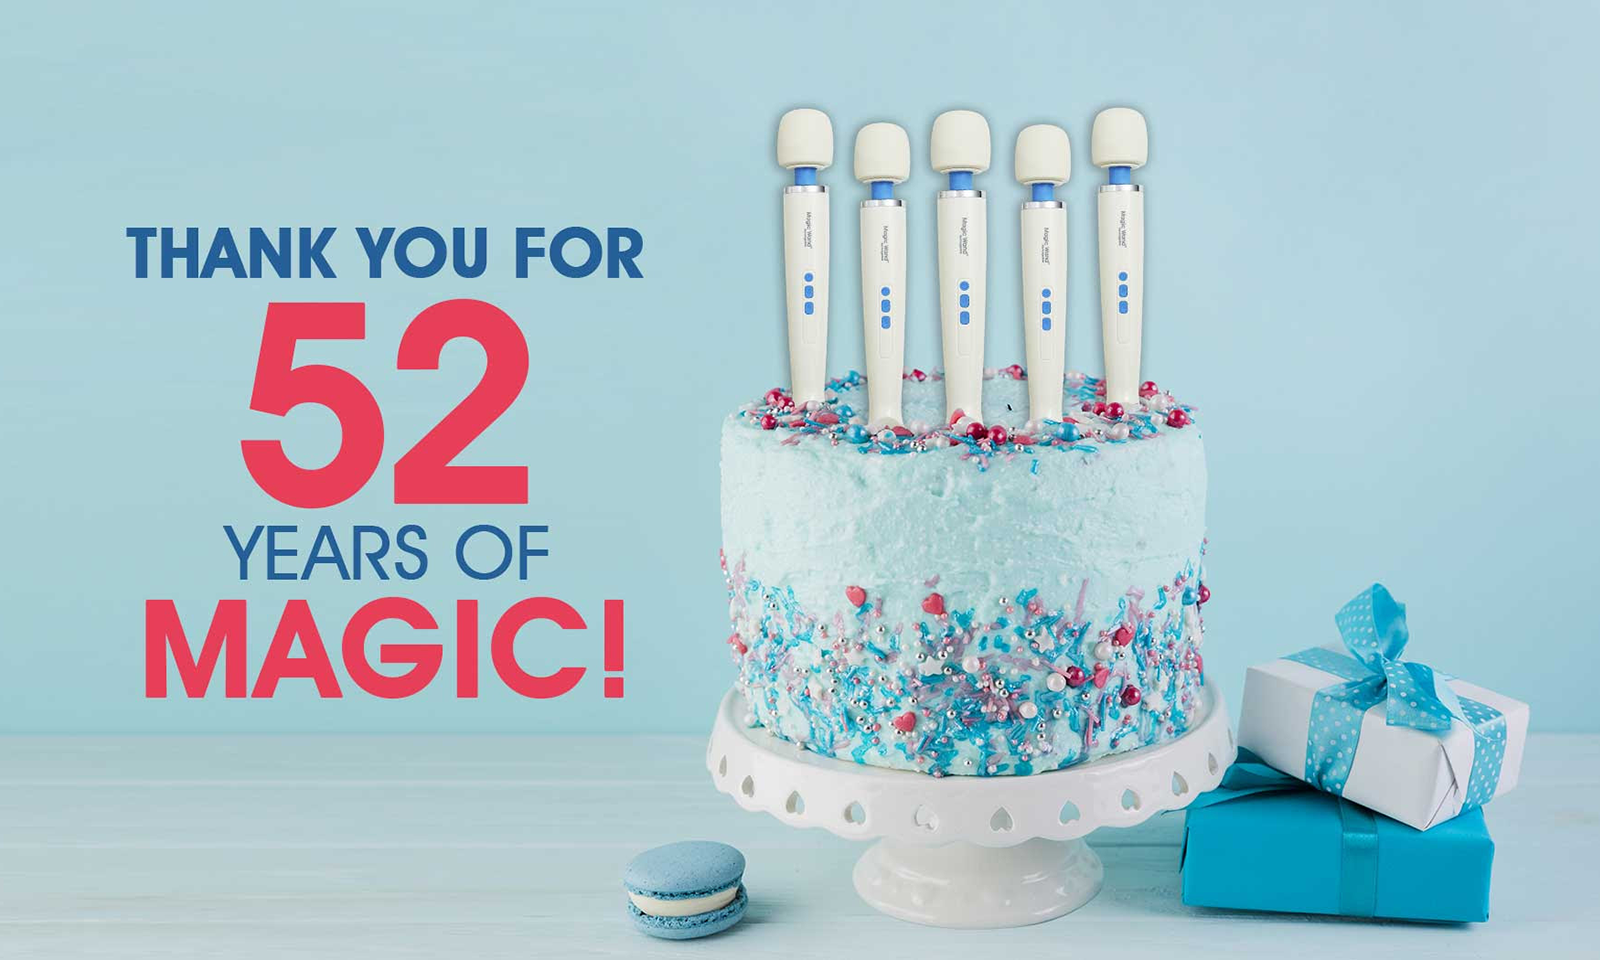 Magic Wand Announces Winners of Its Birthday Contest